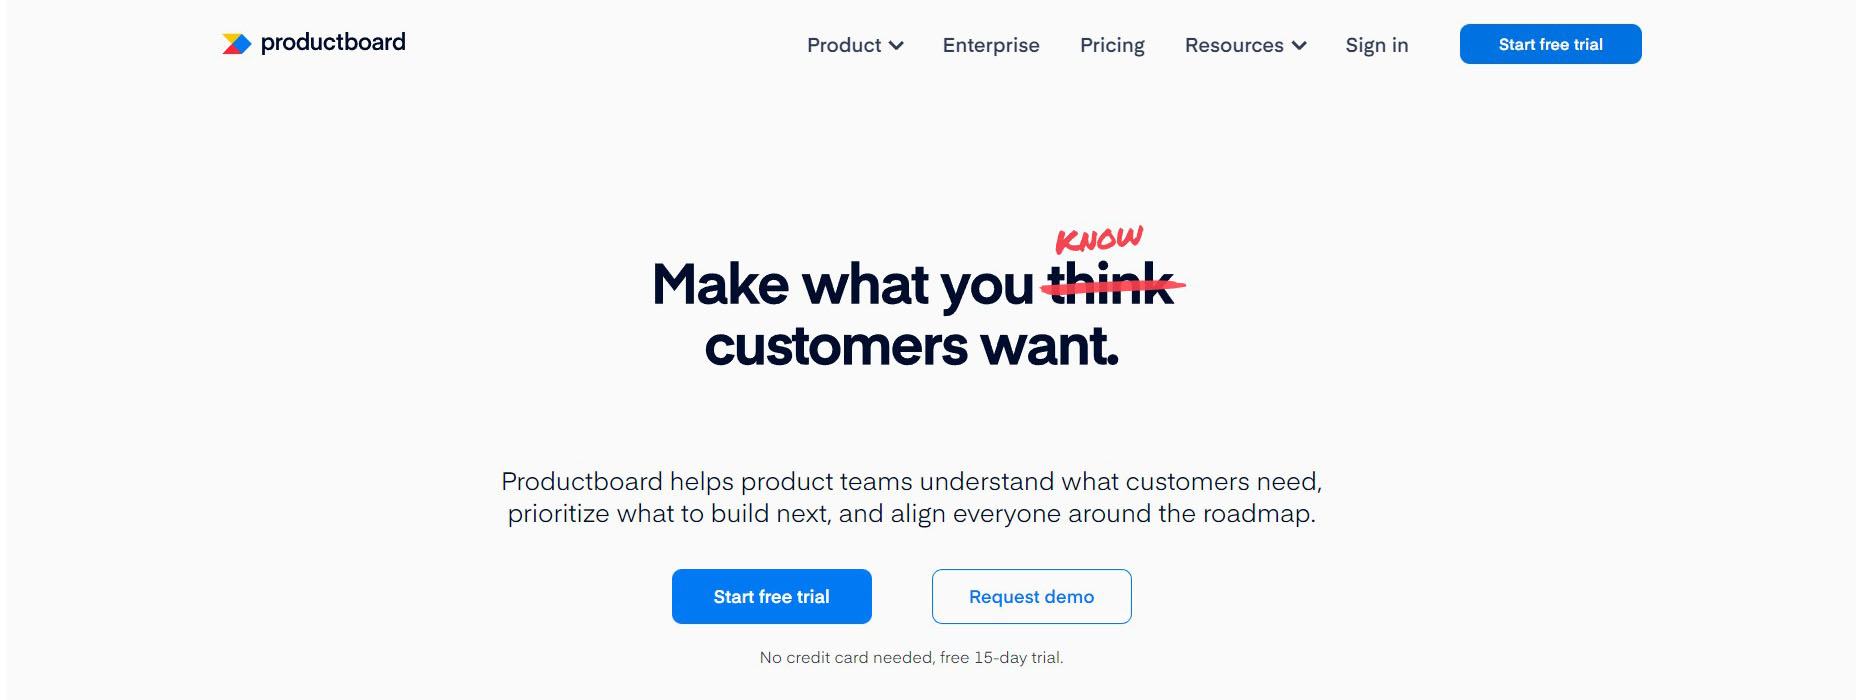 14 Best Product Management Tools for 2023 06